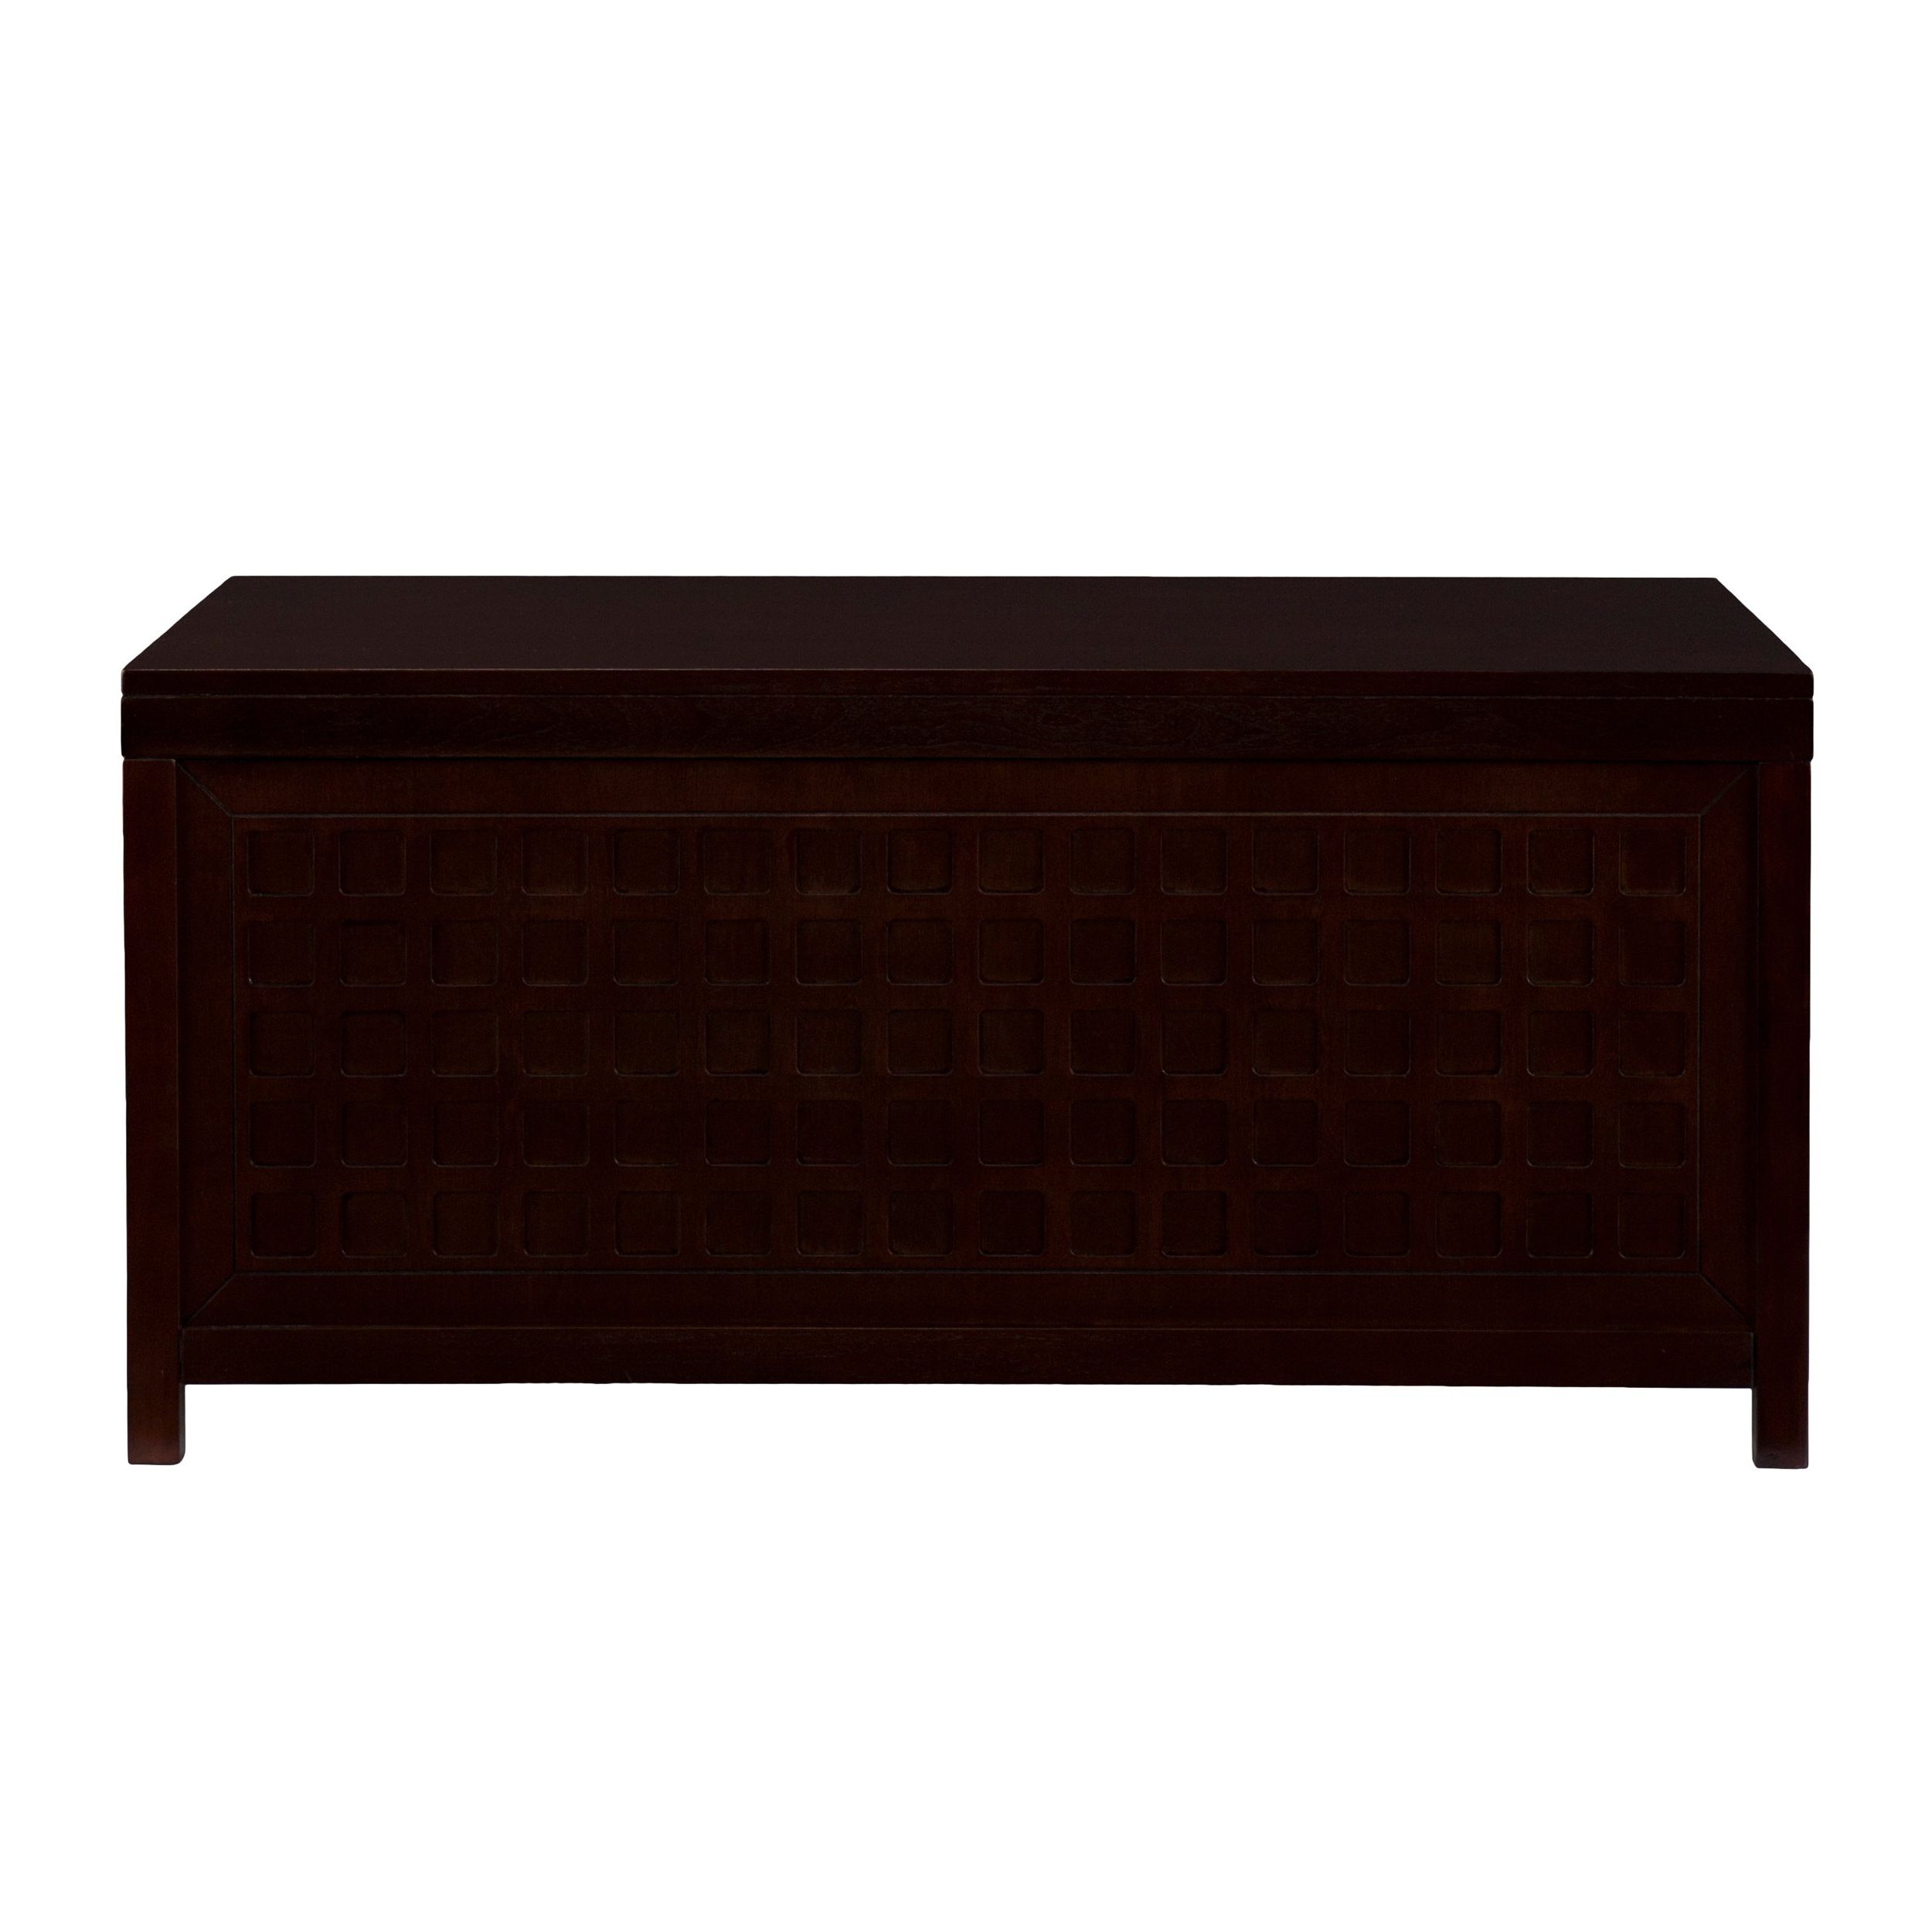 Shop Harper Blvd Anson Cocktail Trunk Table – Espresso – On Sale Within Famous Anson Cocktail Tables (View 12 of 20)